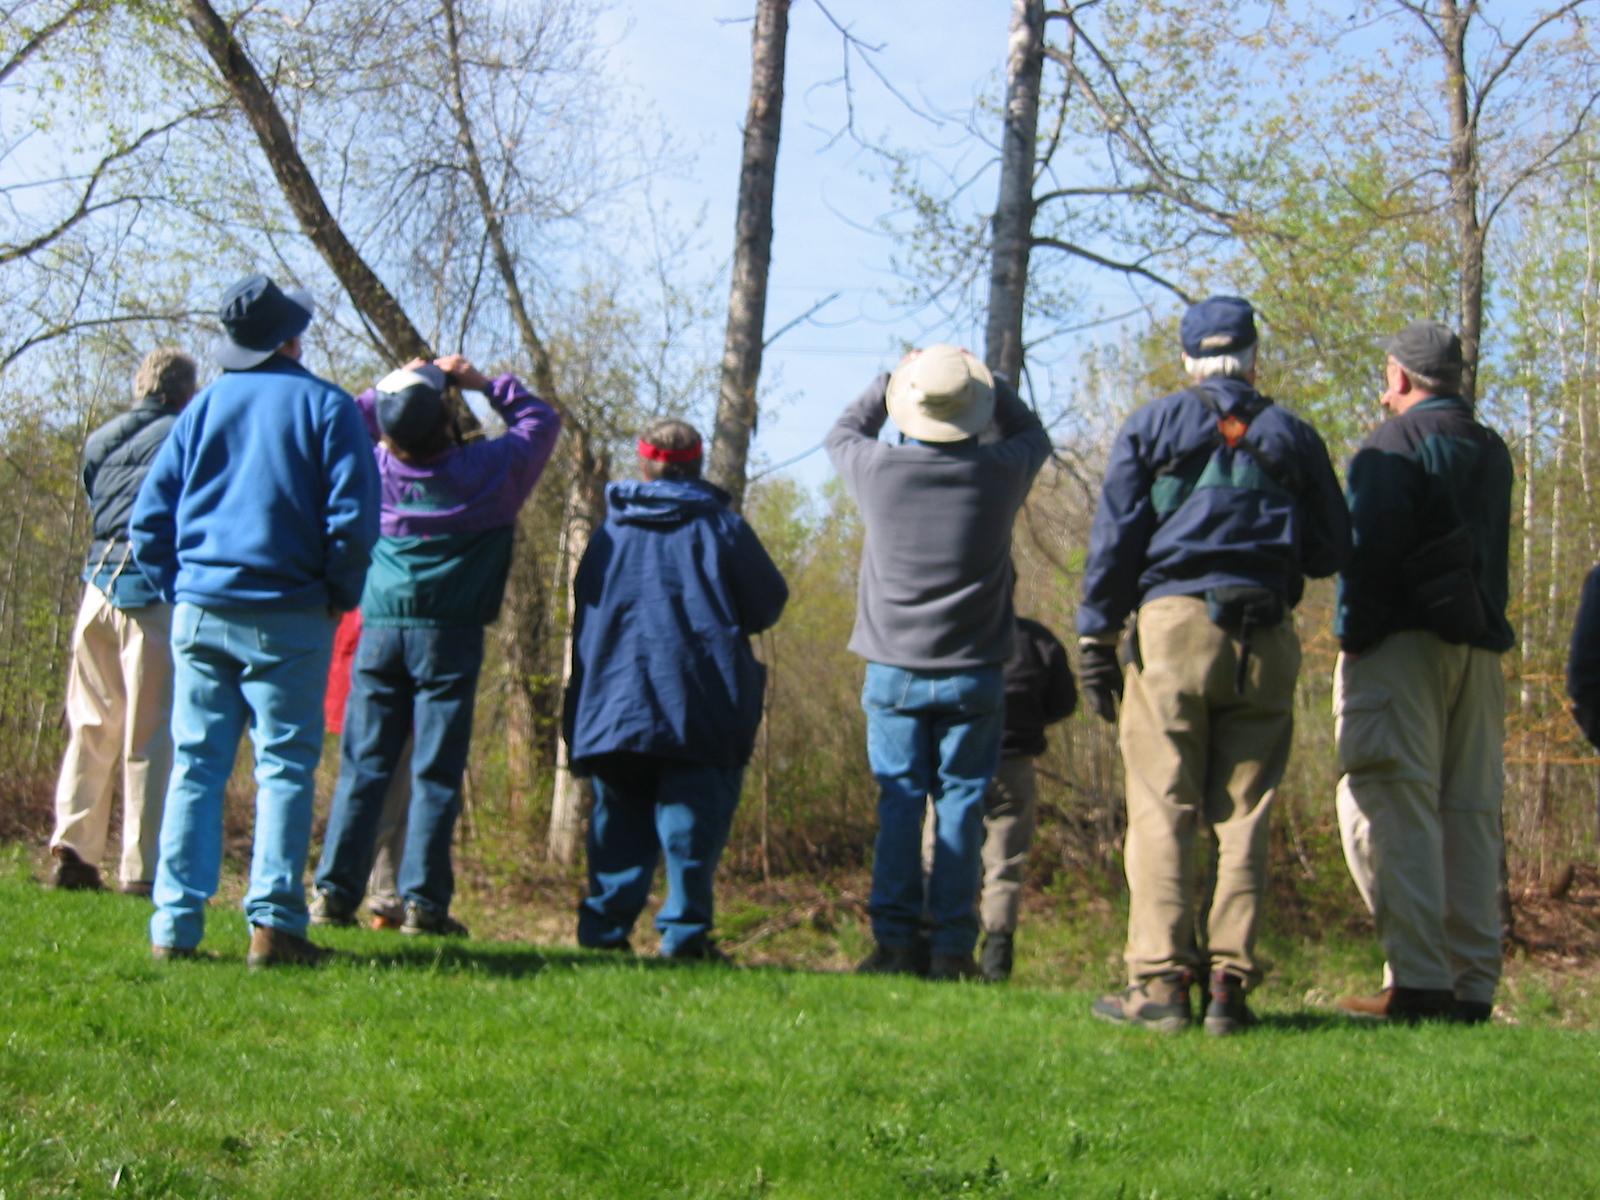 Birders in early spring, looking at trees that are not fully leafed out.